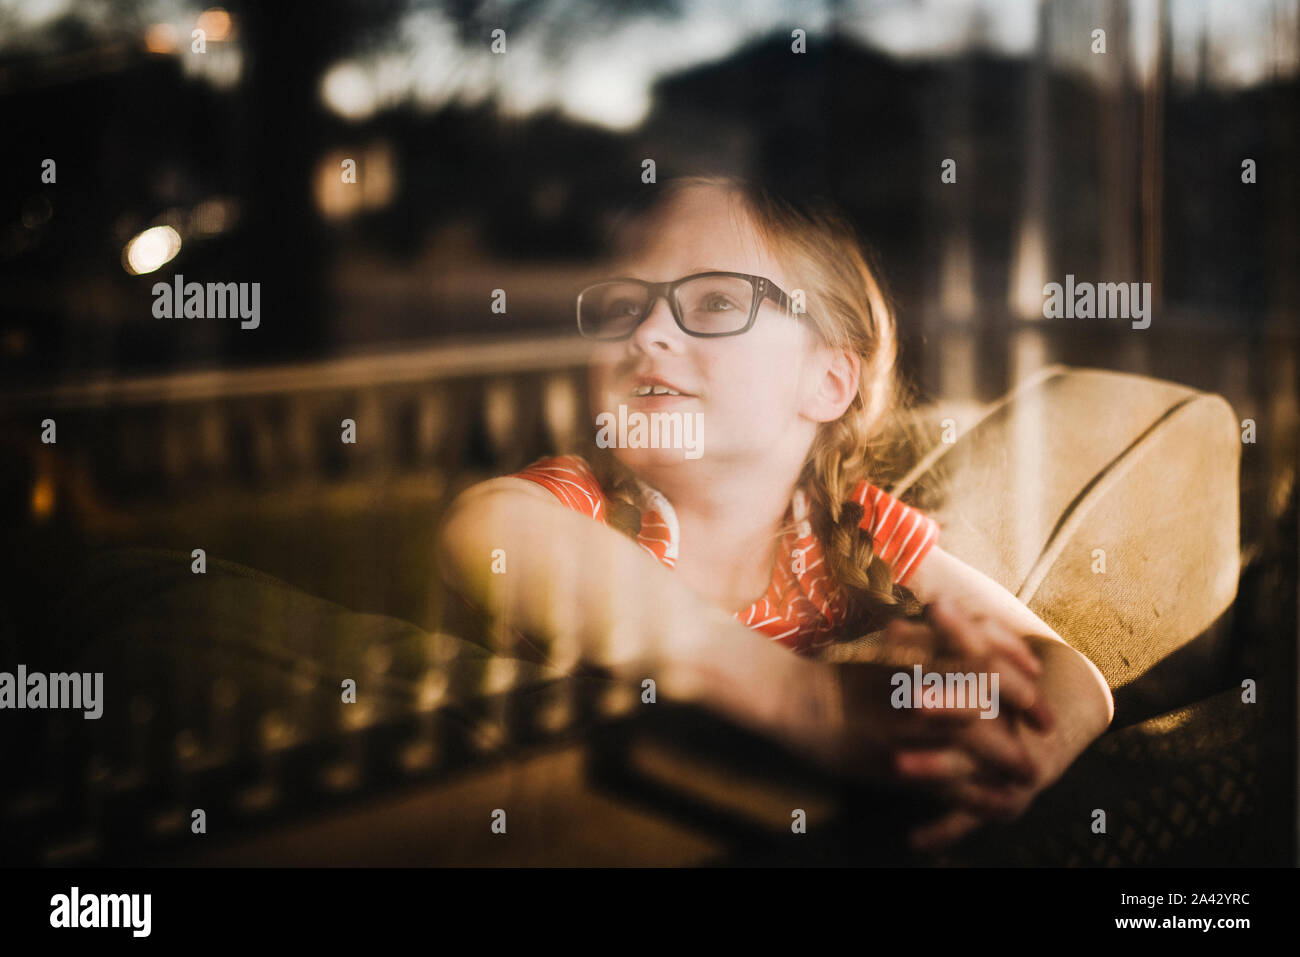 Front view of little girl looking out of window with reflections Stock Photo